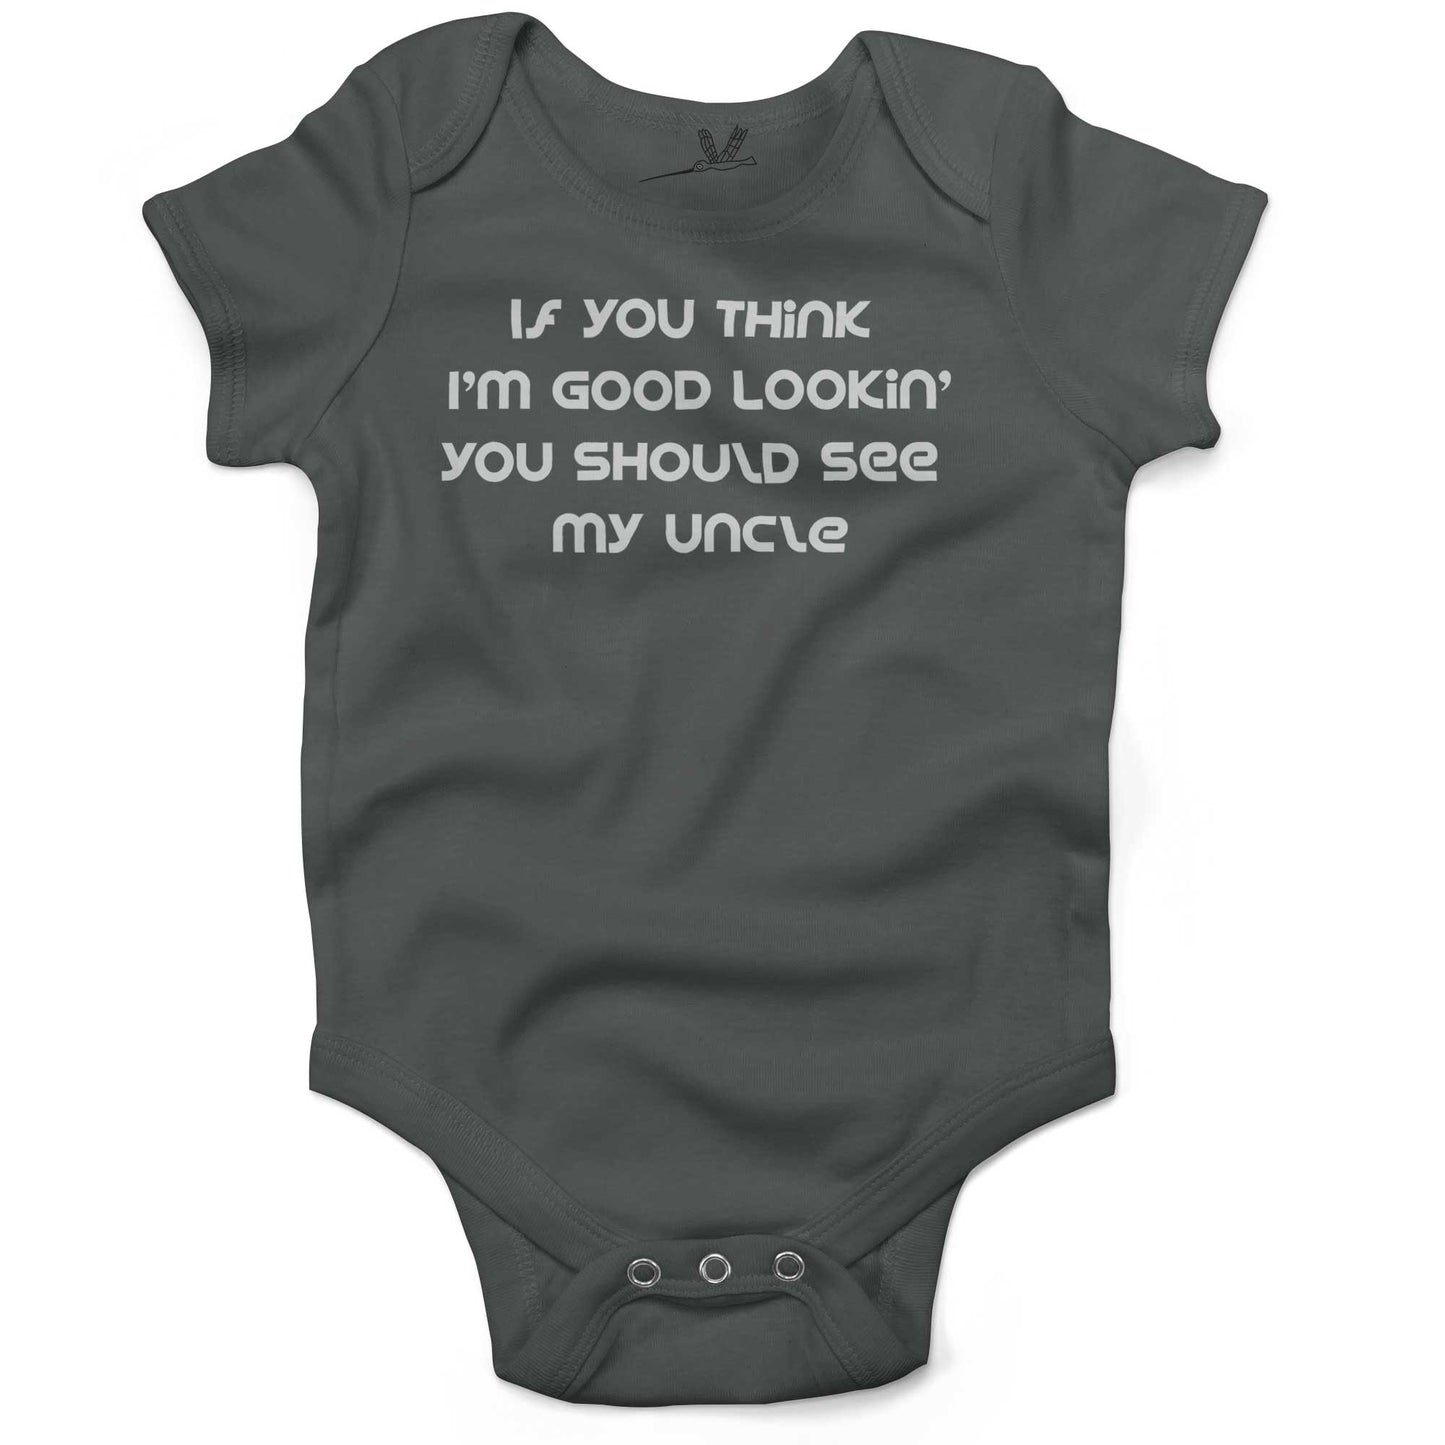 If You Think I'm Good Lookin' You Should See My Uncle Infant Bodysuit or Raglan Tee-Organic Asphalt-3-6 months